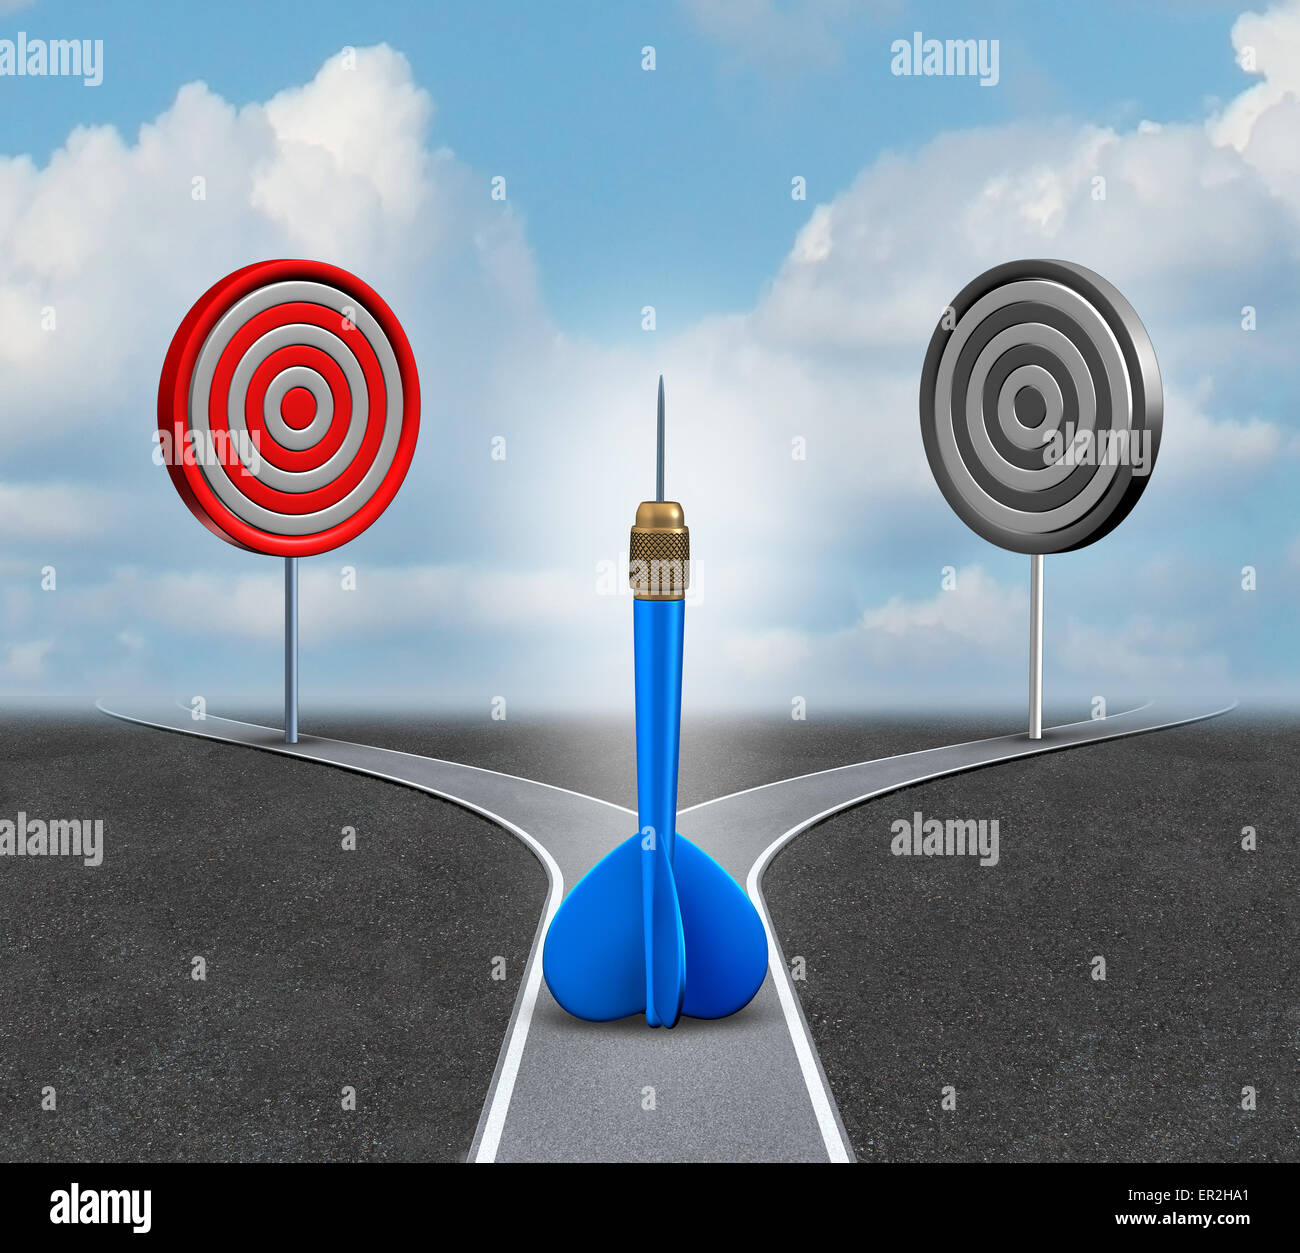 Strategy decision business concept as a confused blue dart deciding which bull eye target to aim for as a metaphor for strategic advice and consulting. Stock Photo